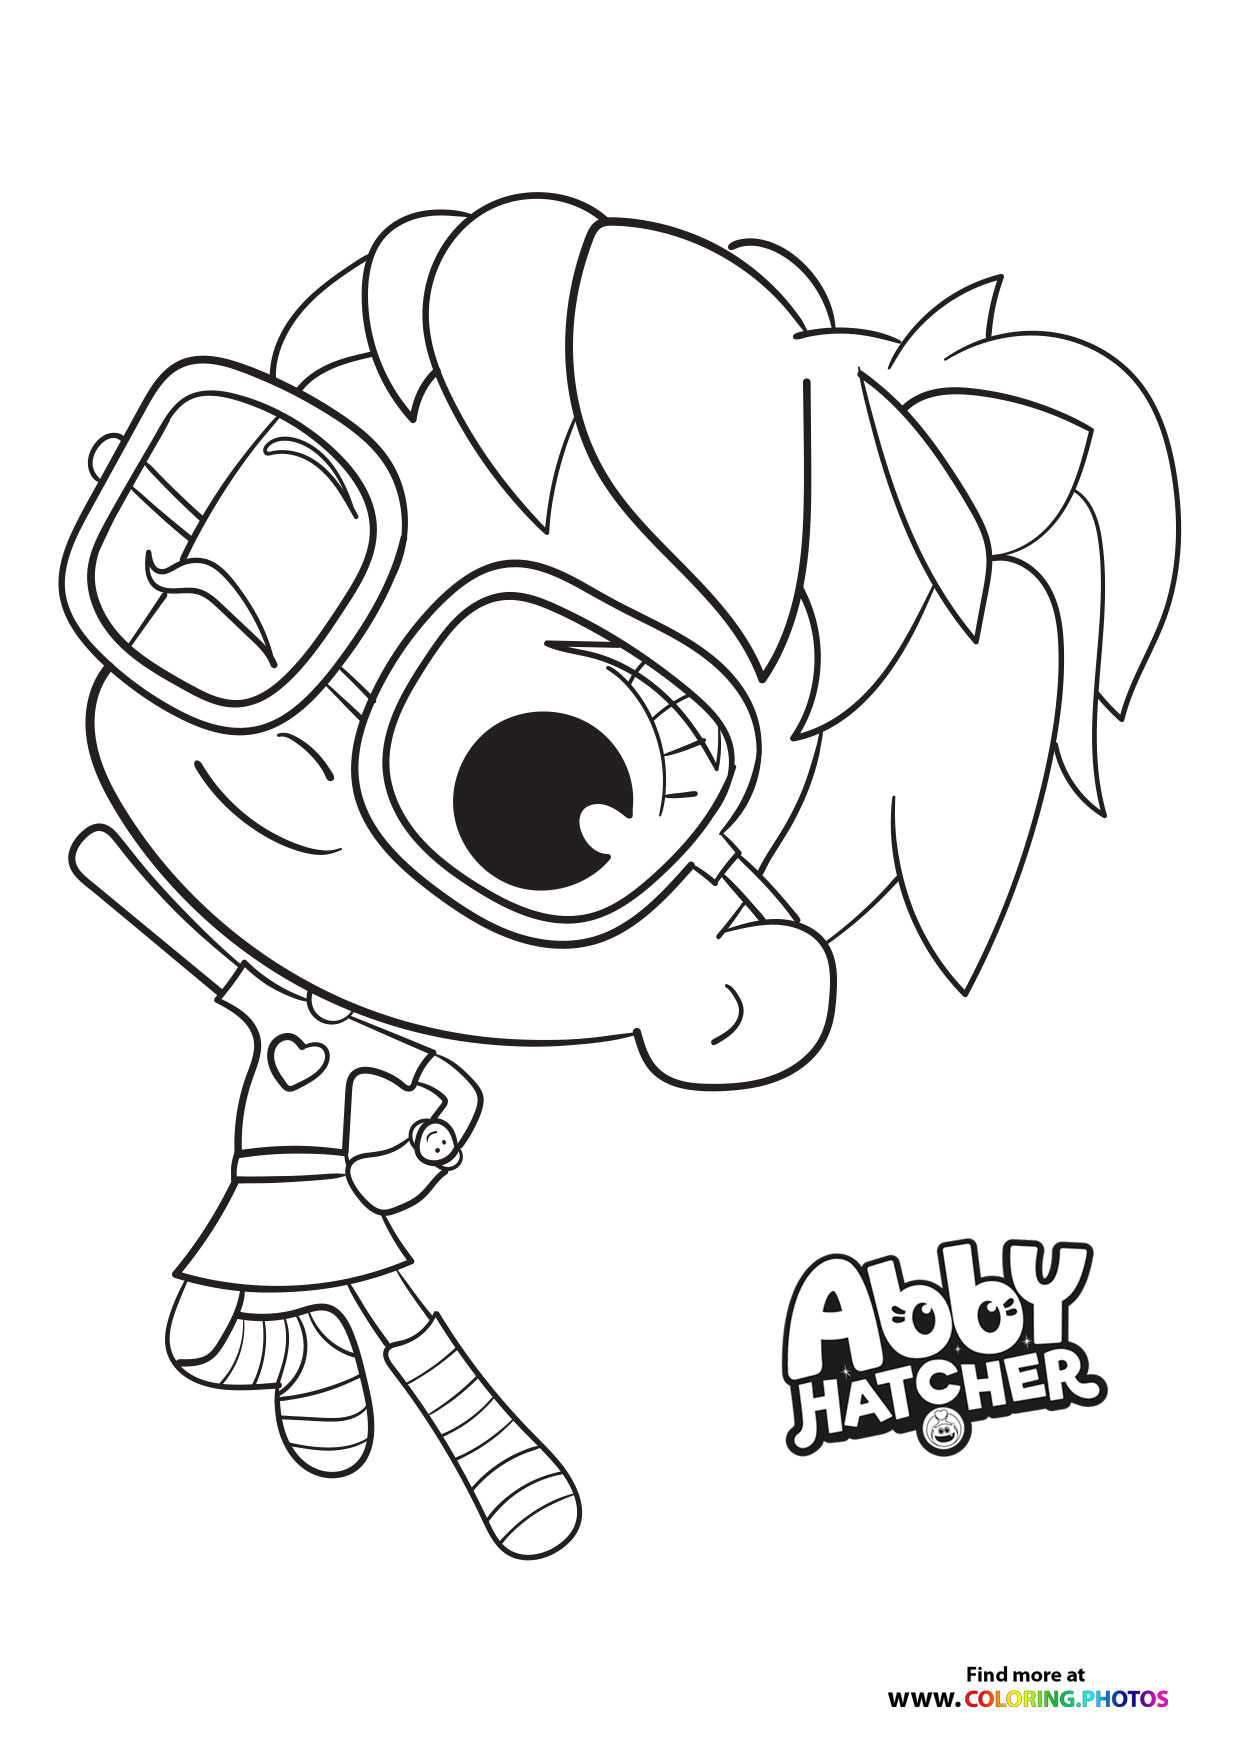 Abby Hatcher Coloring Book Coloring Pages